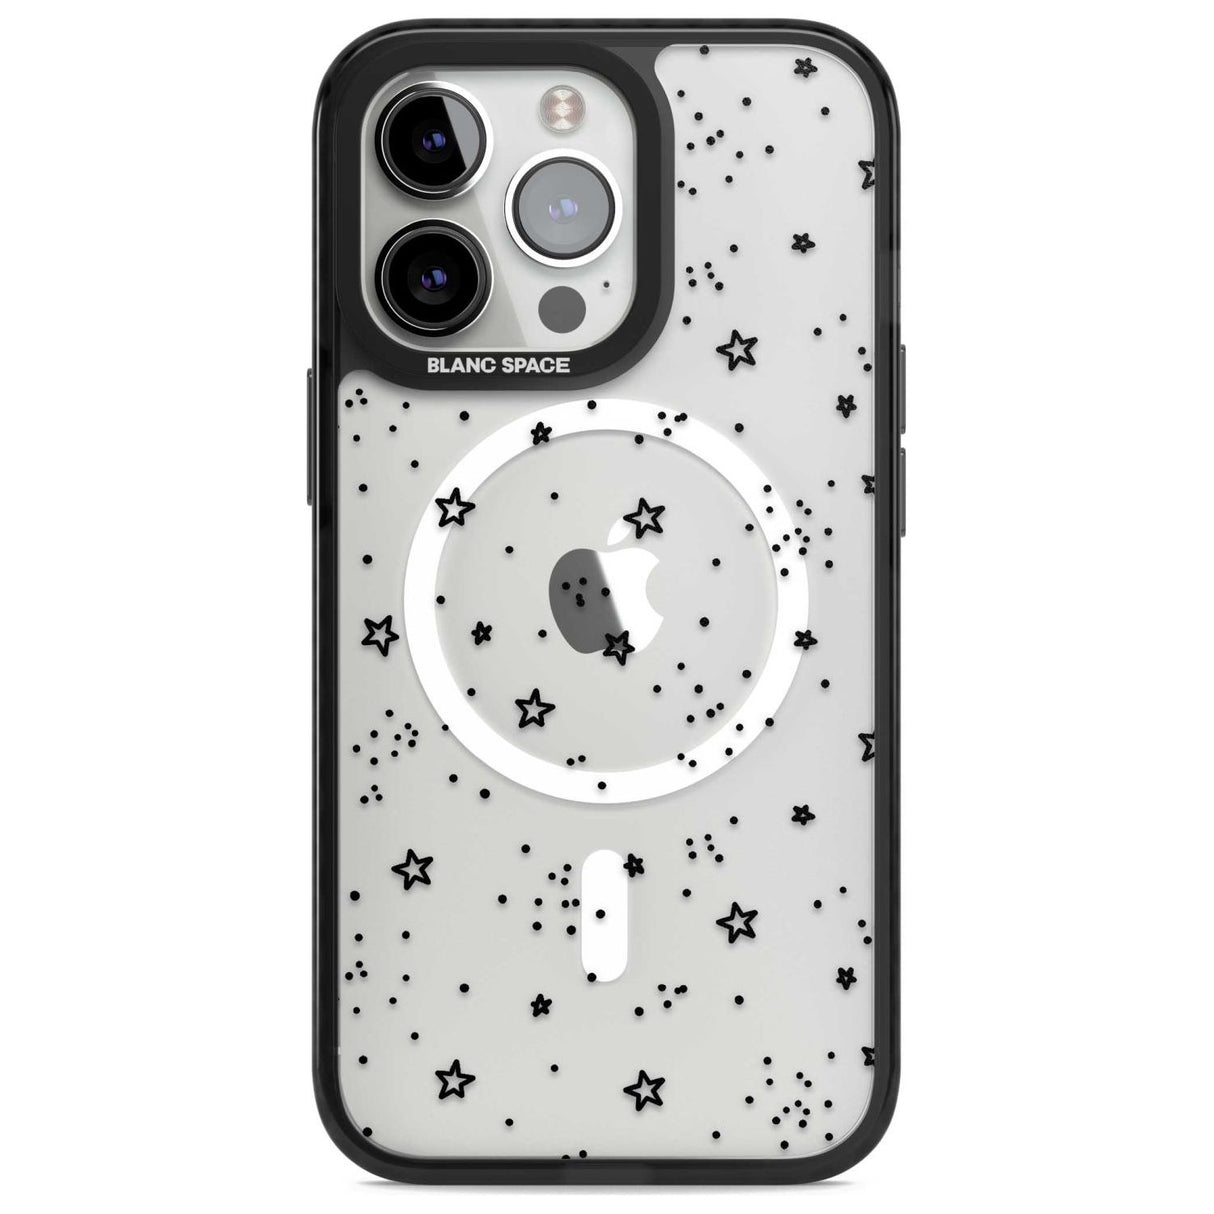 Mixed Stars Phone Case iPhone 15 Pro Max / Magsafe Black Impact Case,iPhone 15 Pro / Magsafe Black Impact Case,iPhone 14 Pro Max / Magsafe Black Impact Case,iPhone 14 Pro / Magsafe Black Impact Case,iPhone 13 Pro / Magsafe Black Impact Case Blanc Space